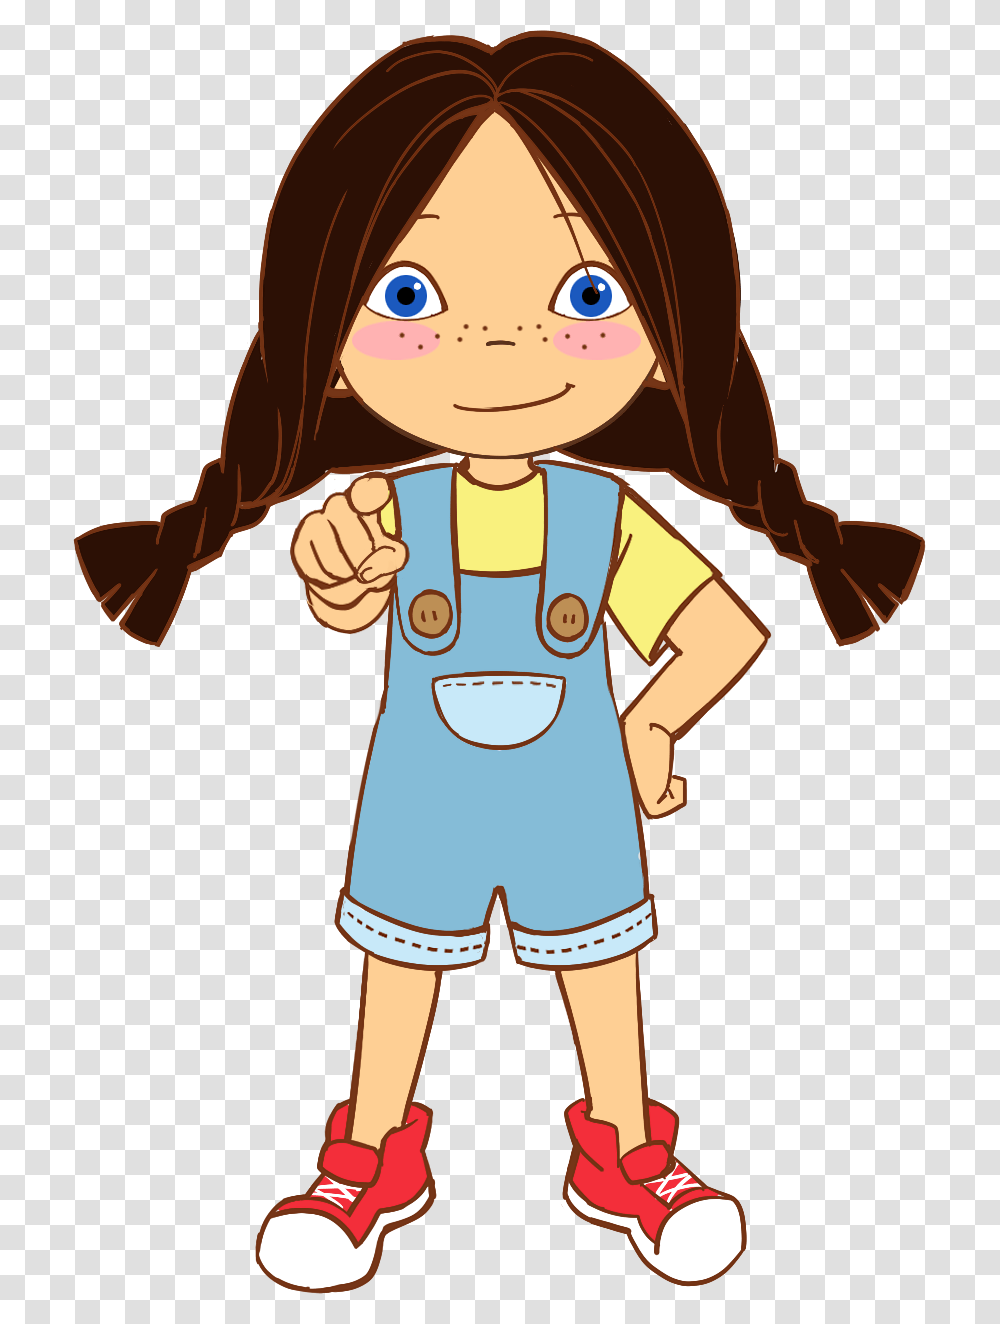 Image Result For Vipkid Clipart Characters Vip Kid, Female, Doll, Toy, Girl Transparent Png